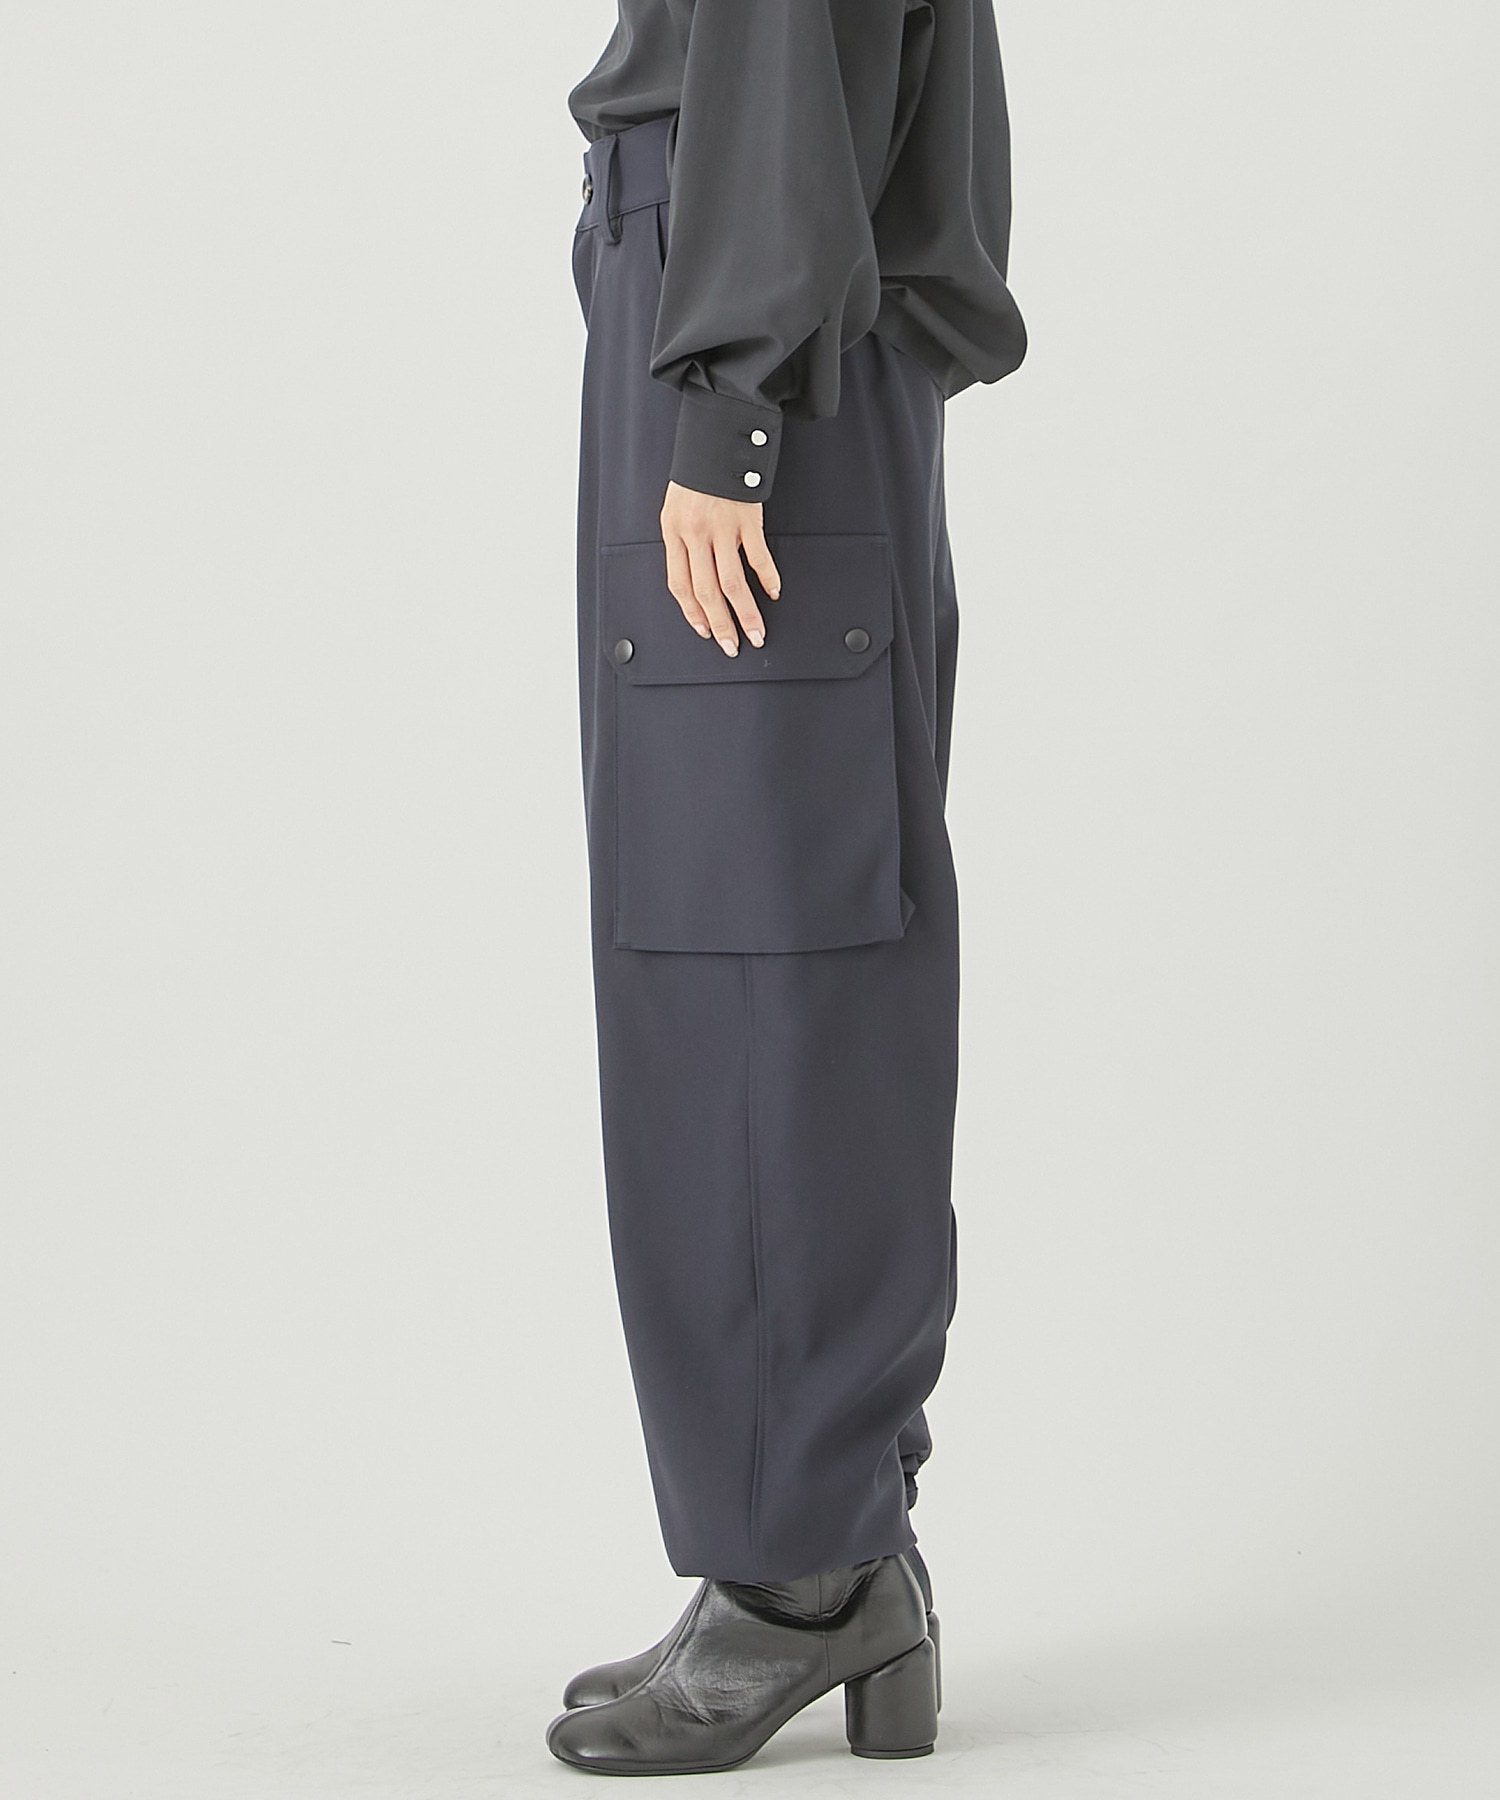 the reracs french army f2 cargo pants | nate-hospital.com